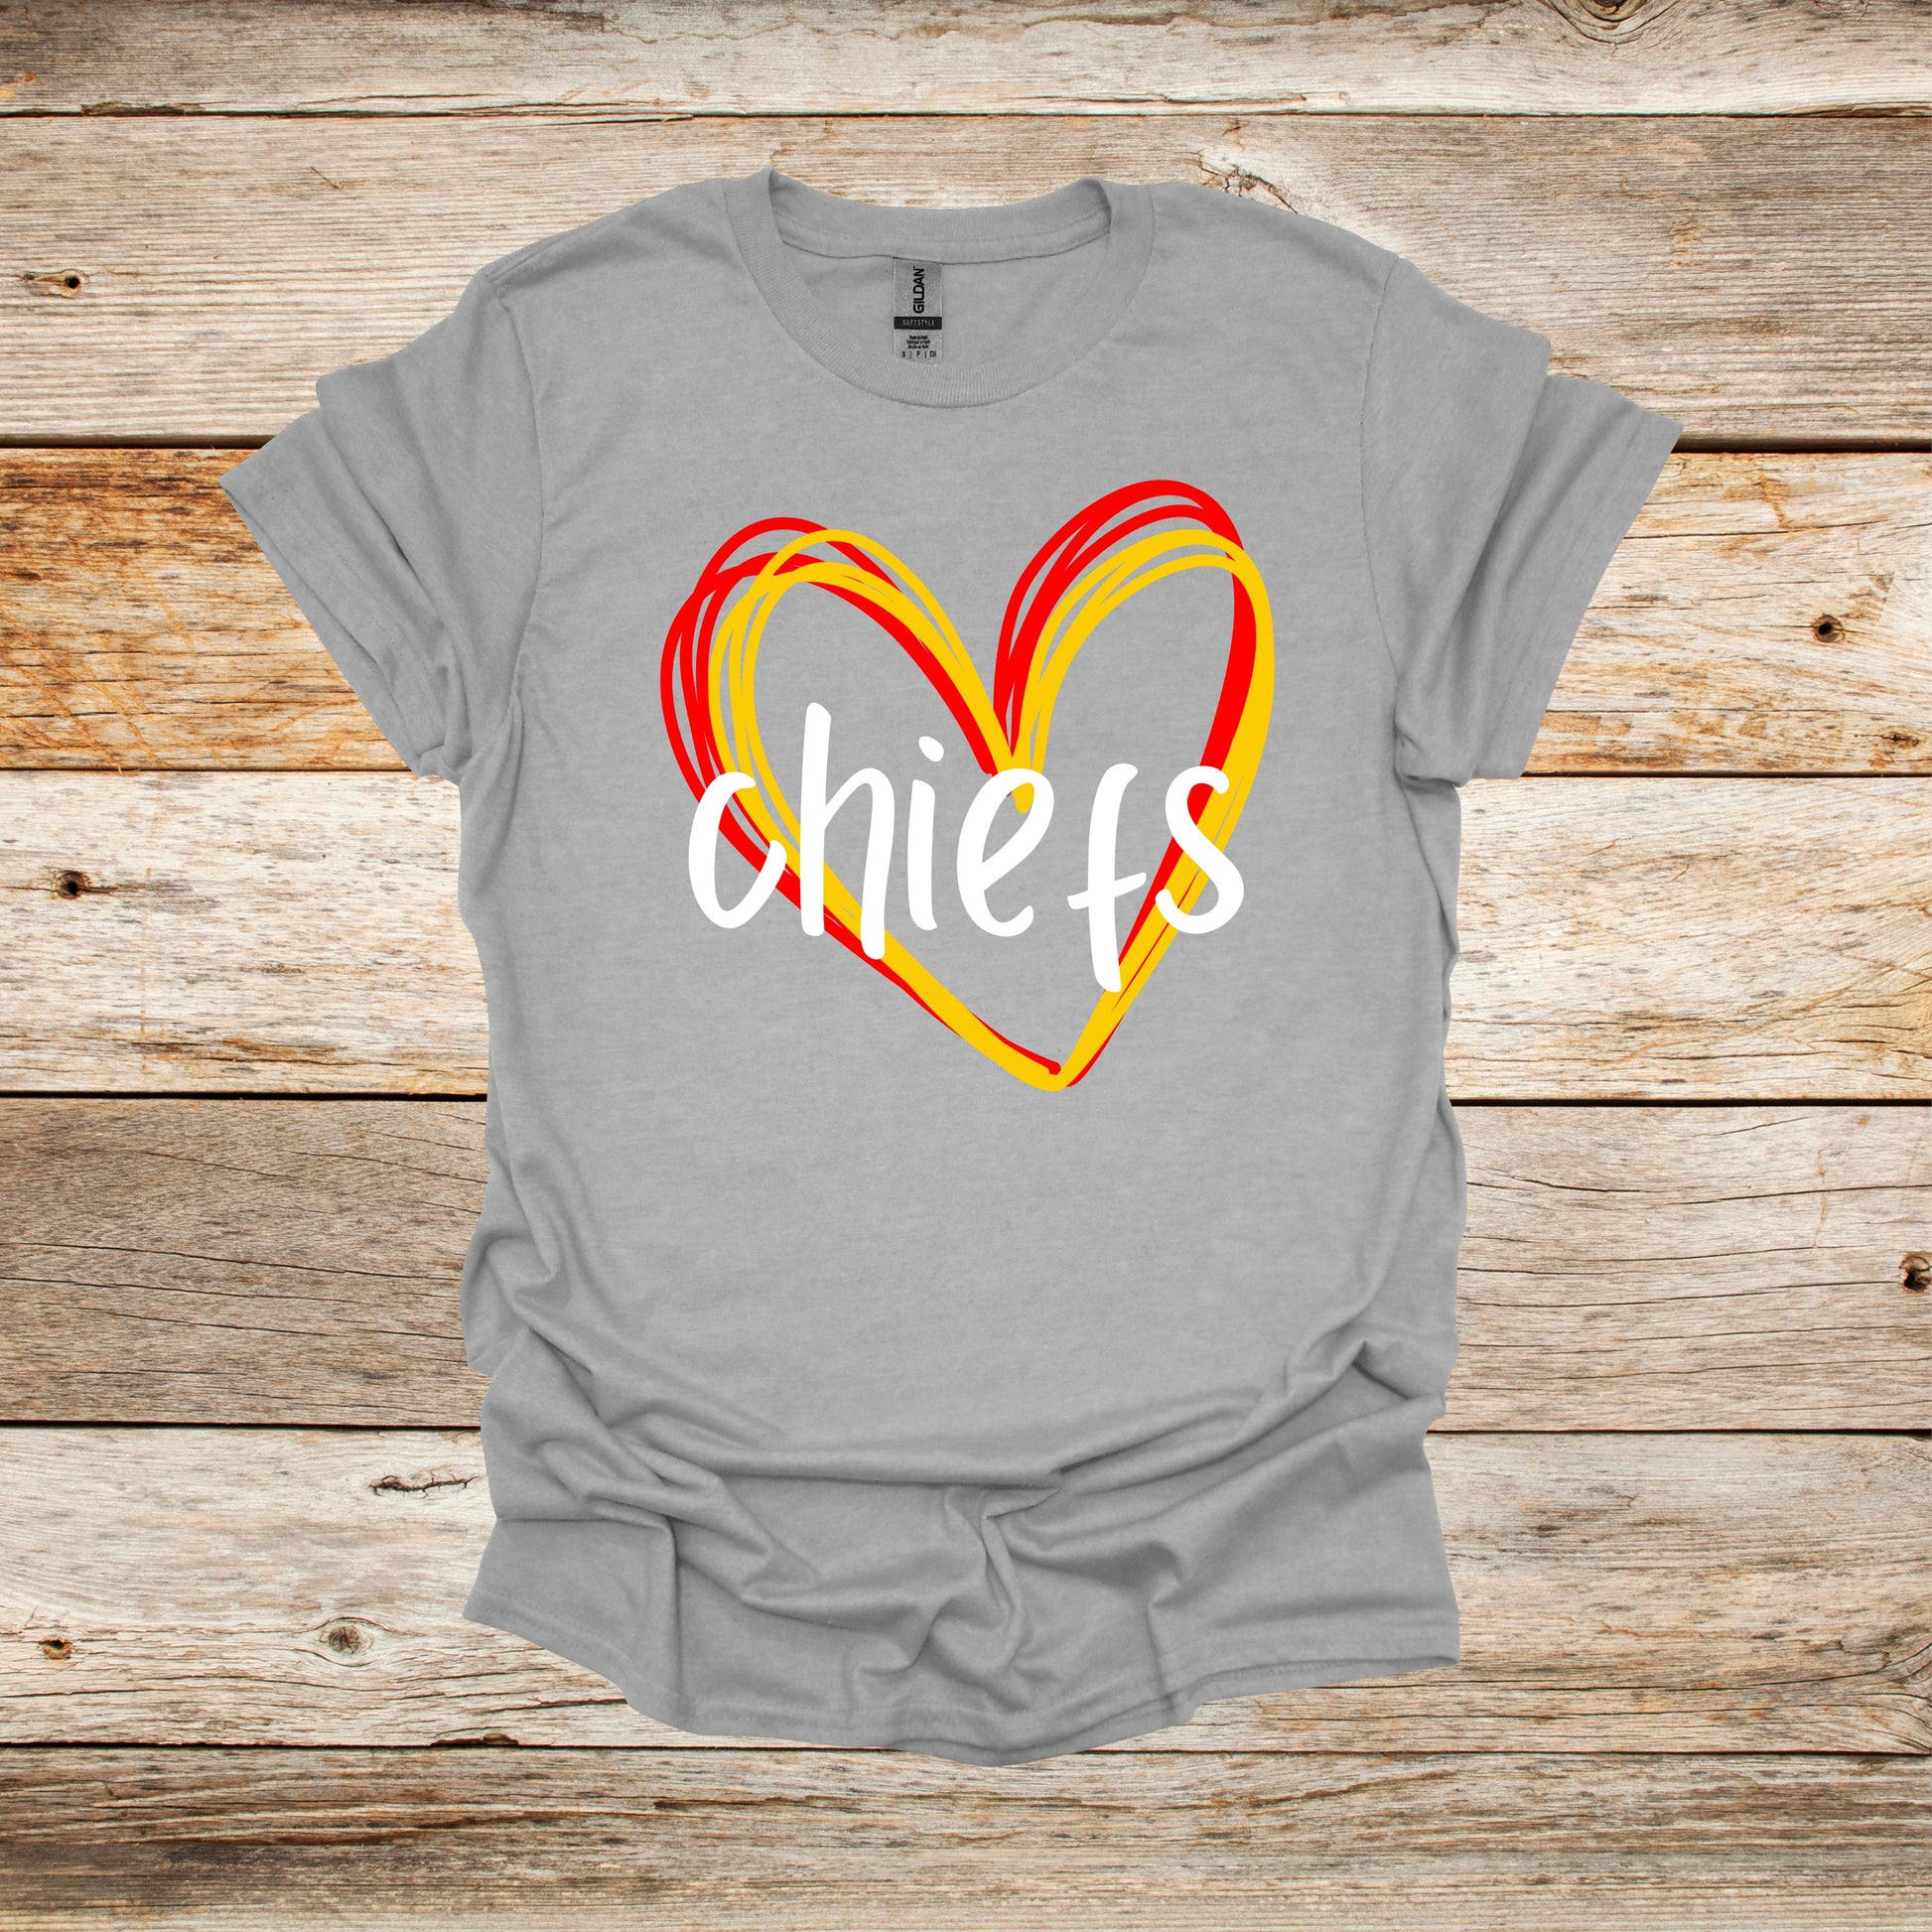 Football T-Shirt - Kansas City Chiefs - Adult and Children's Tee Shirts - Sports T-Shirts Graphic Avenue Sport Grey Adult Small 